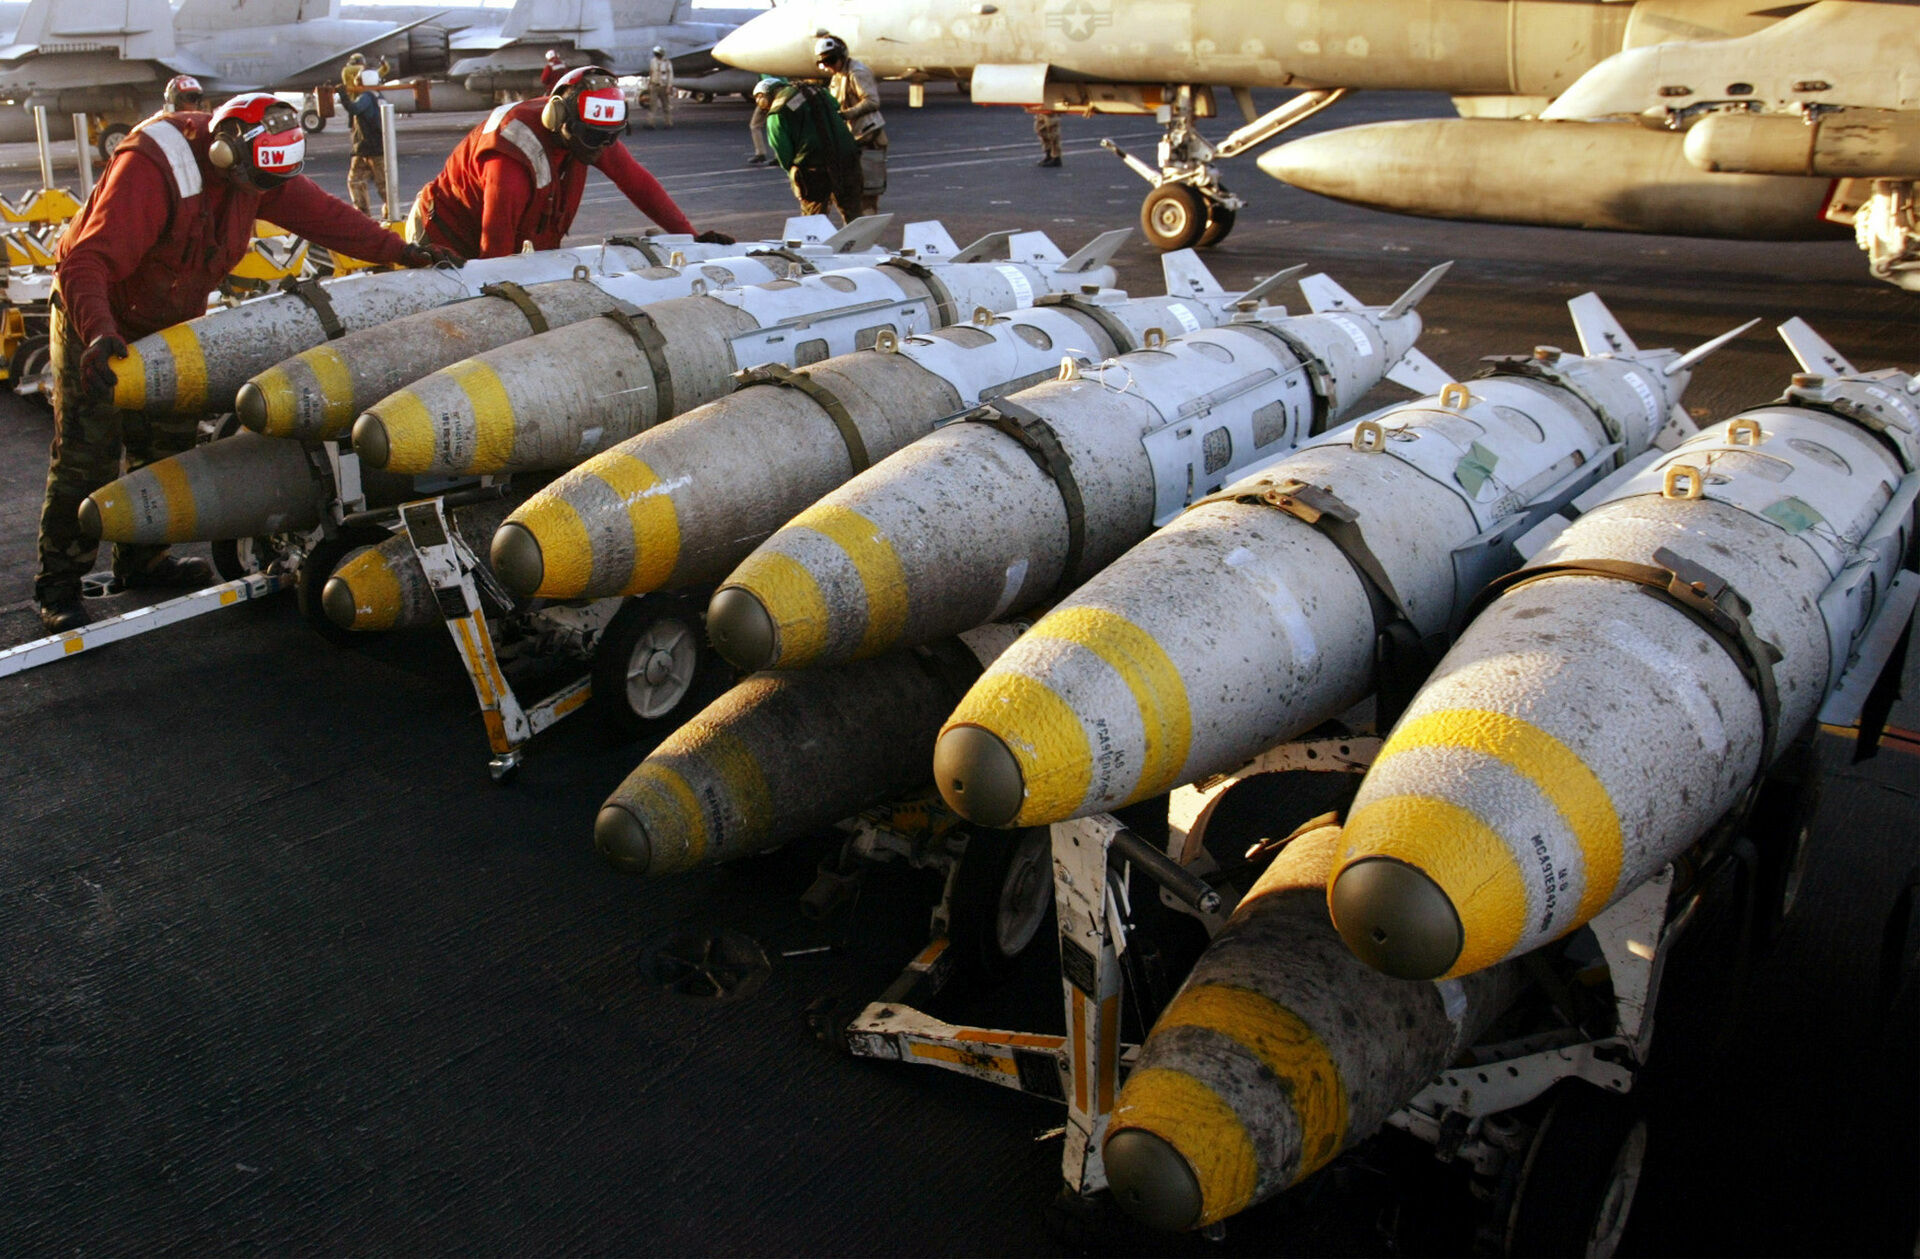 Swedish analysts: a new nuclear arms race has started on the planet